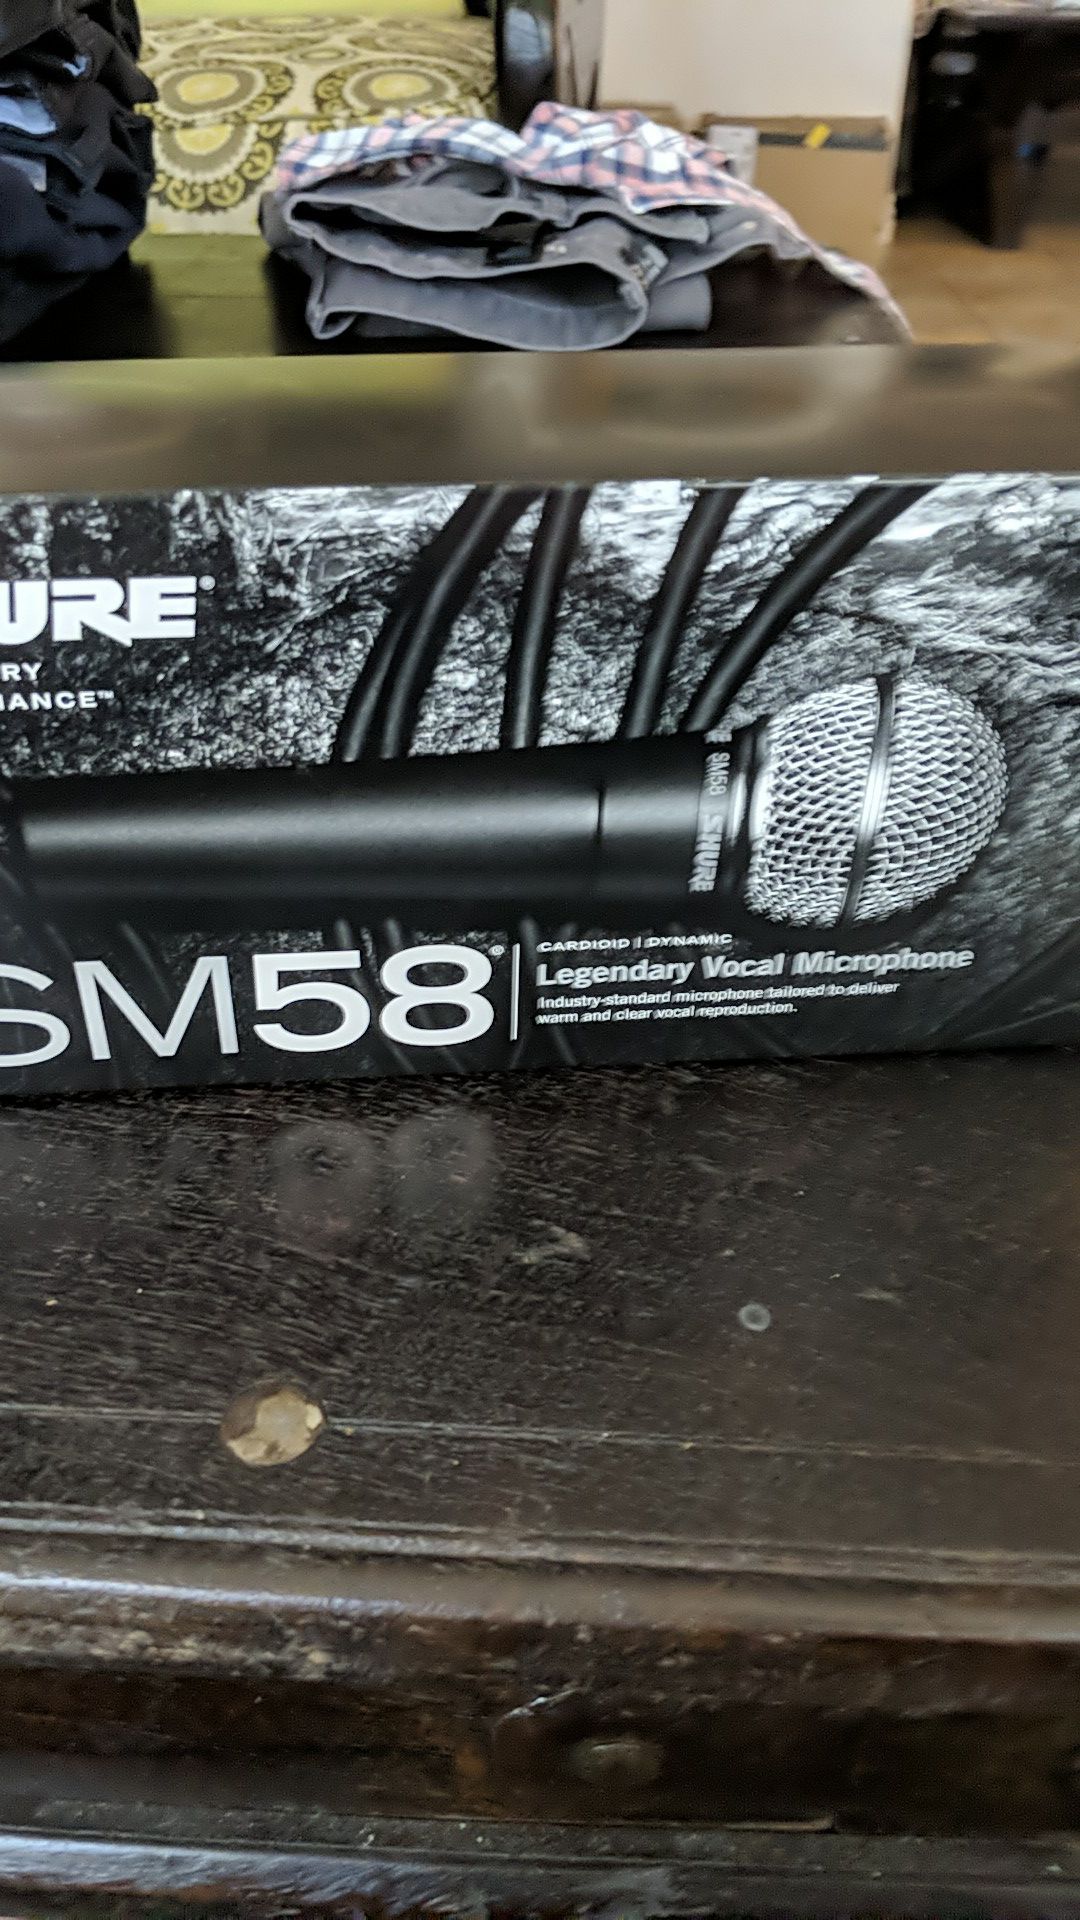 Sure sm58 mic open box NEVER USED!!